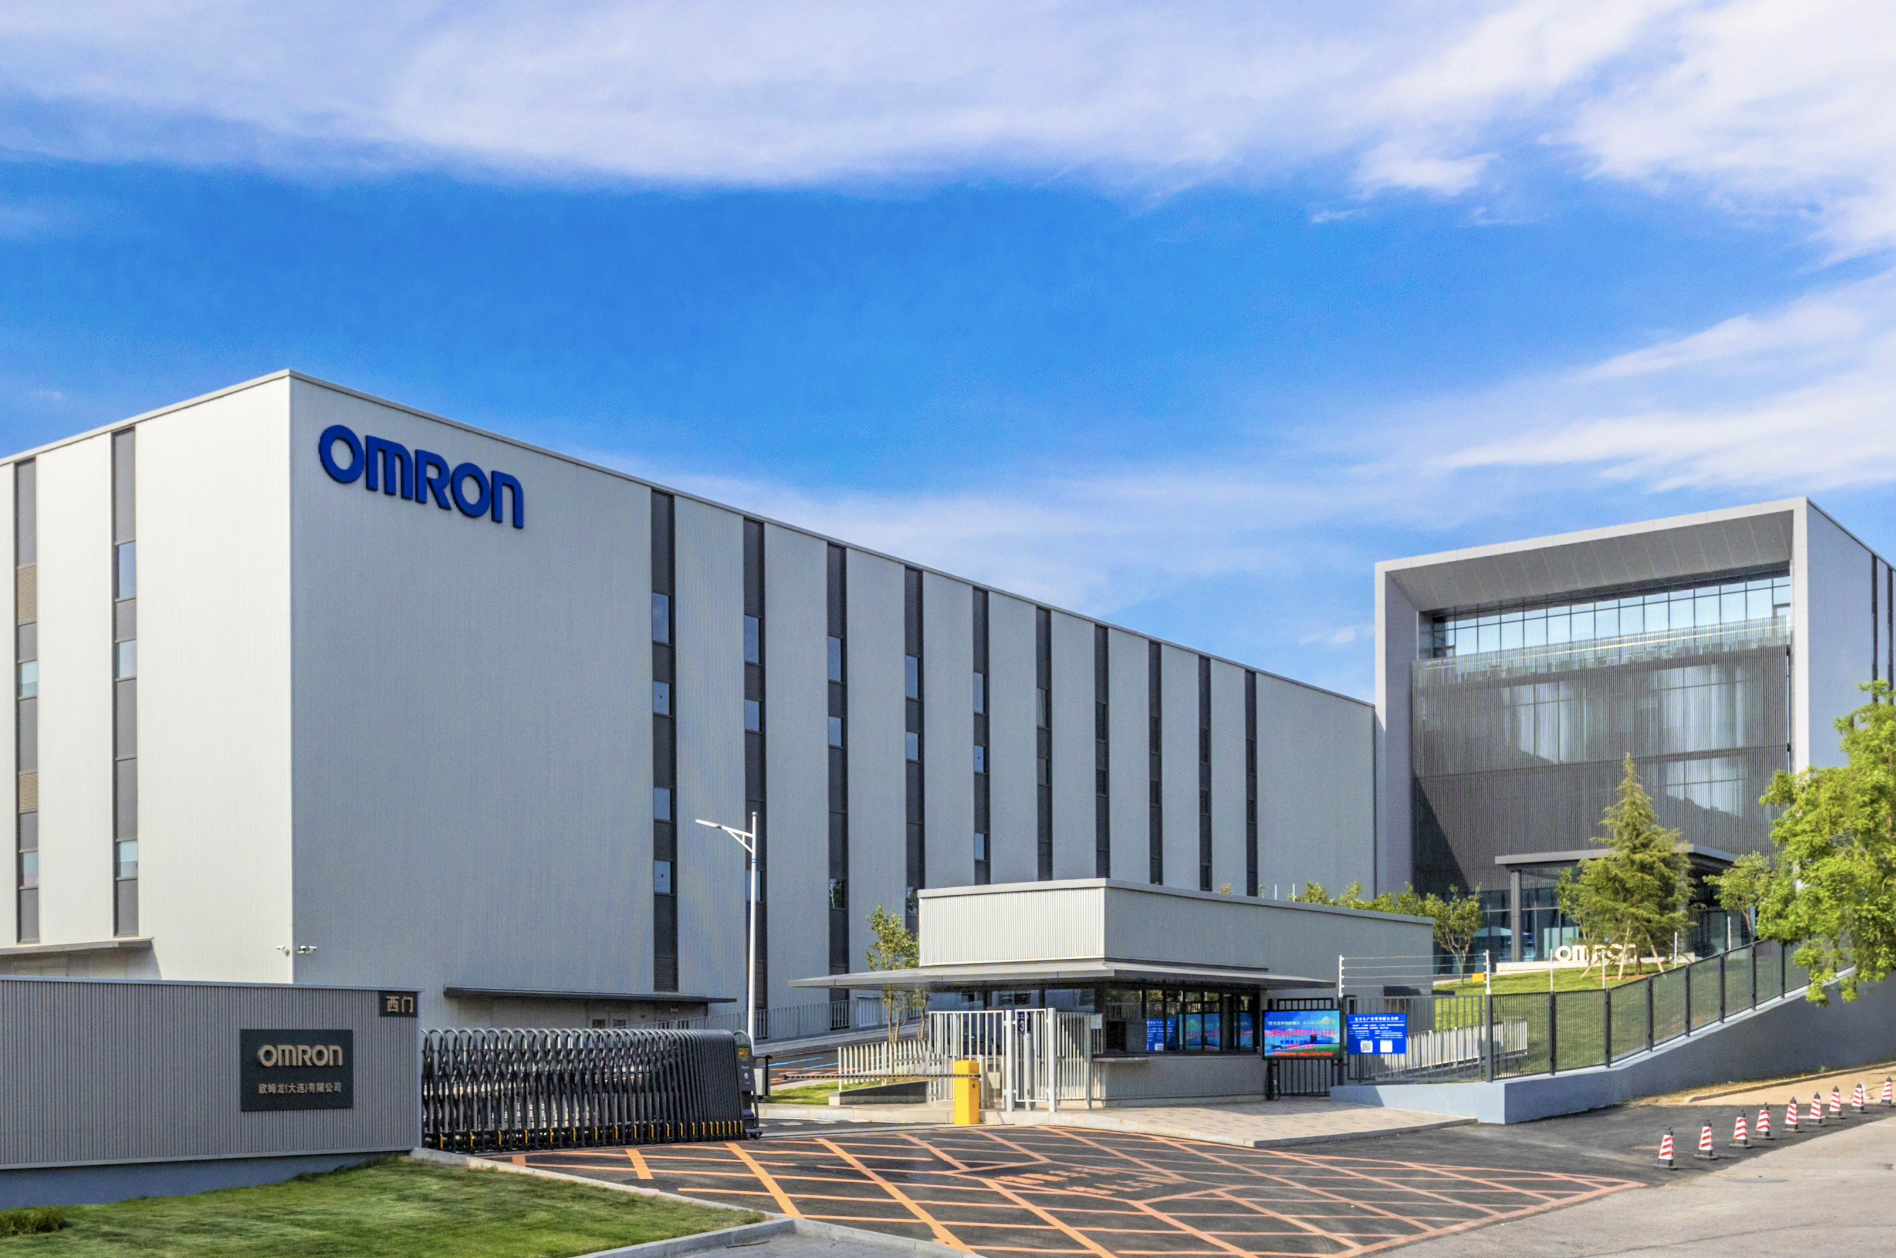 Omron: Innovation should take sustainability as the 